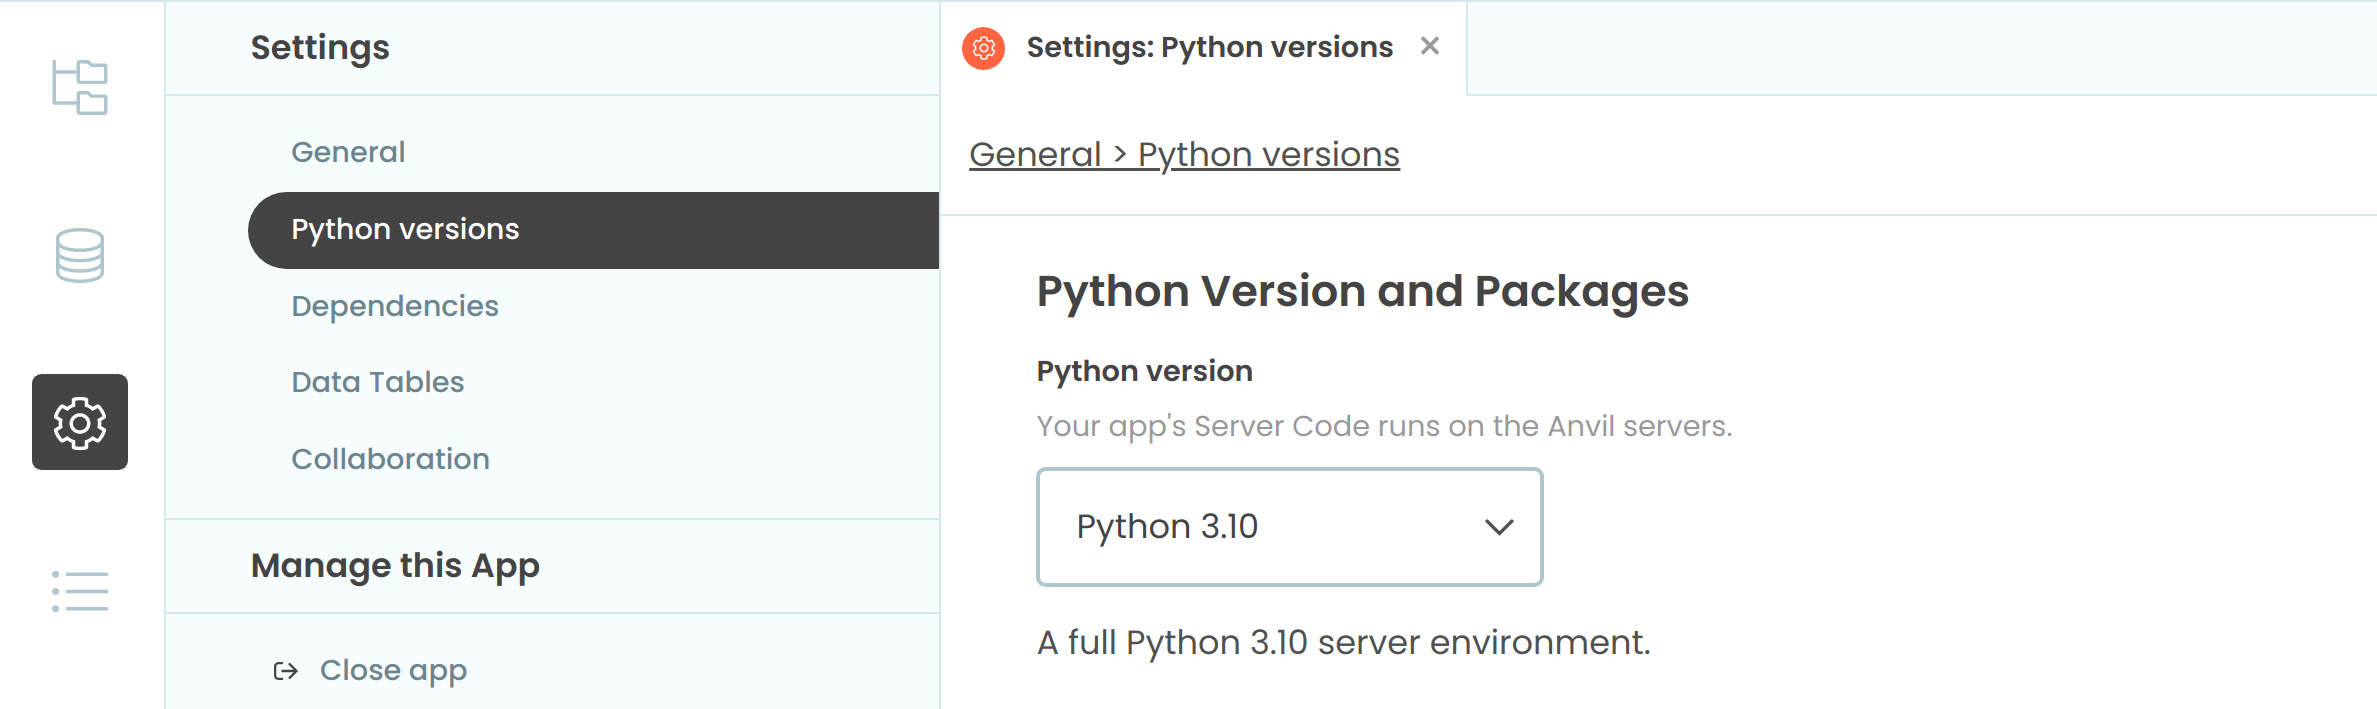 Selecting the Python 3.10 version for your app.